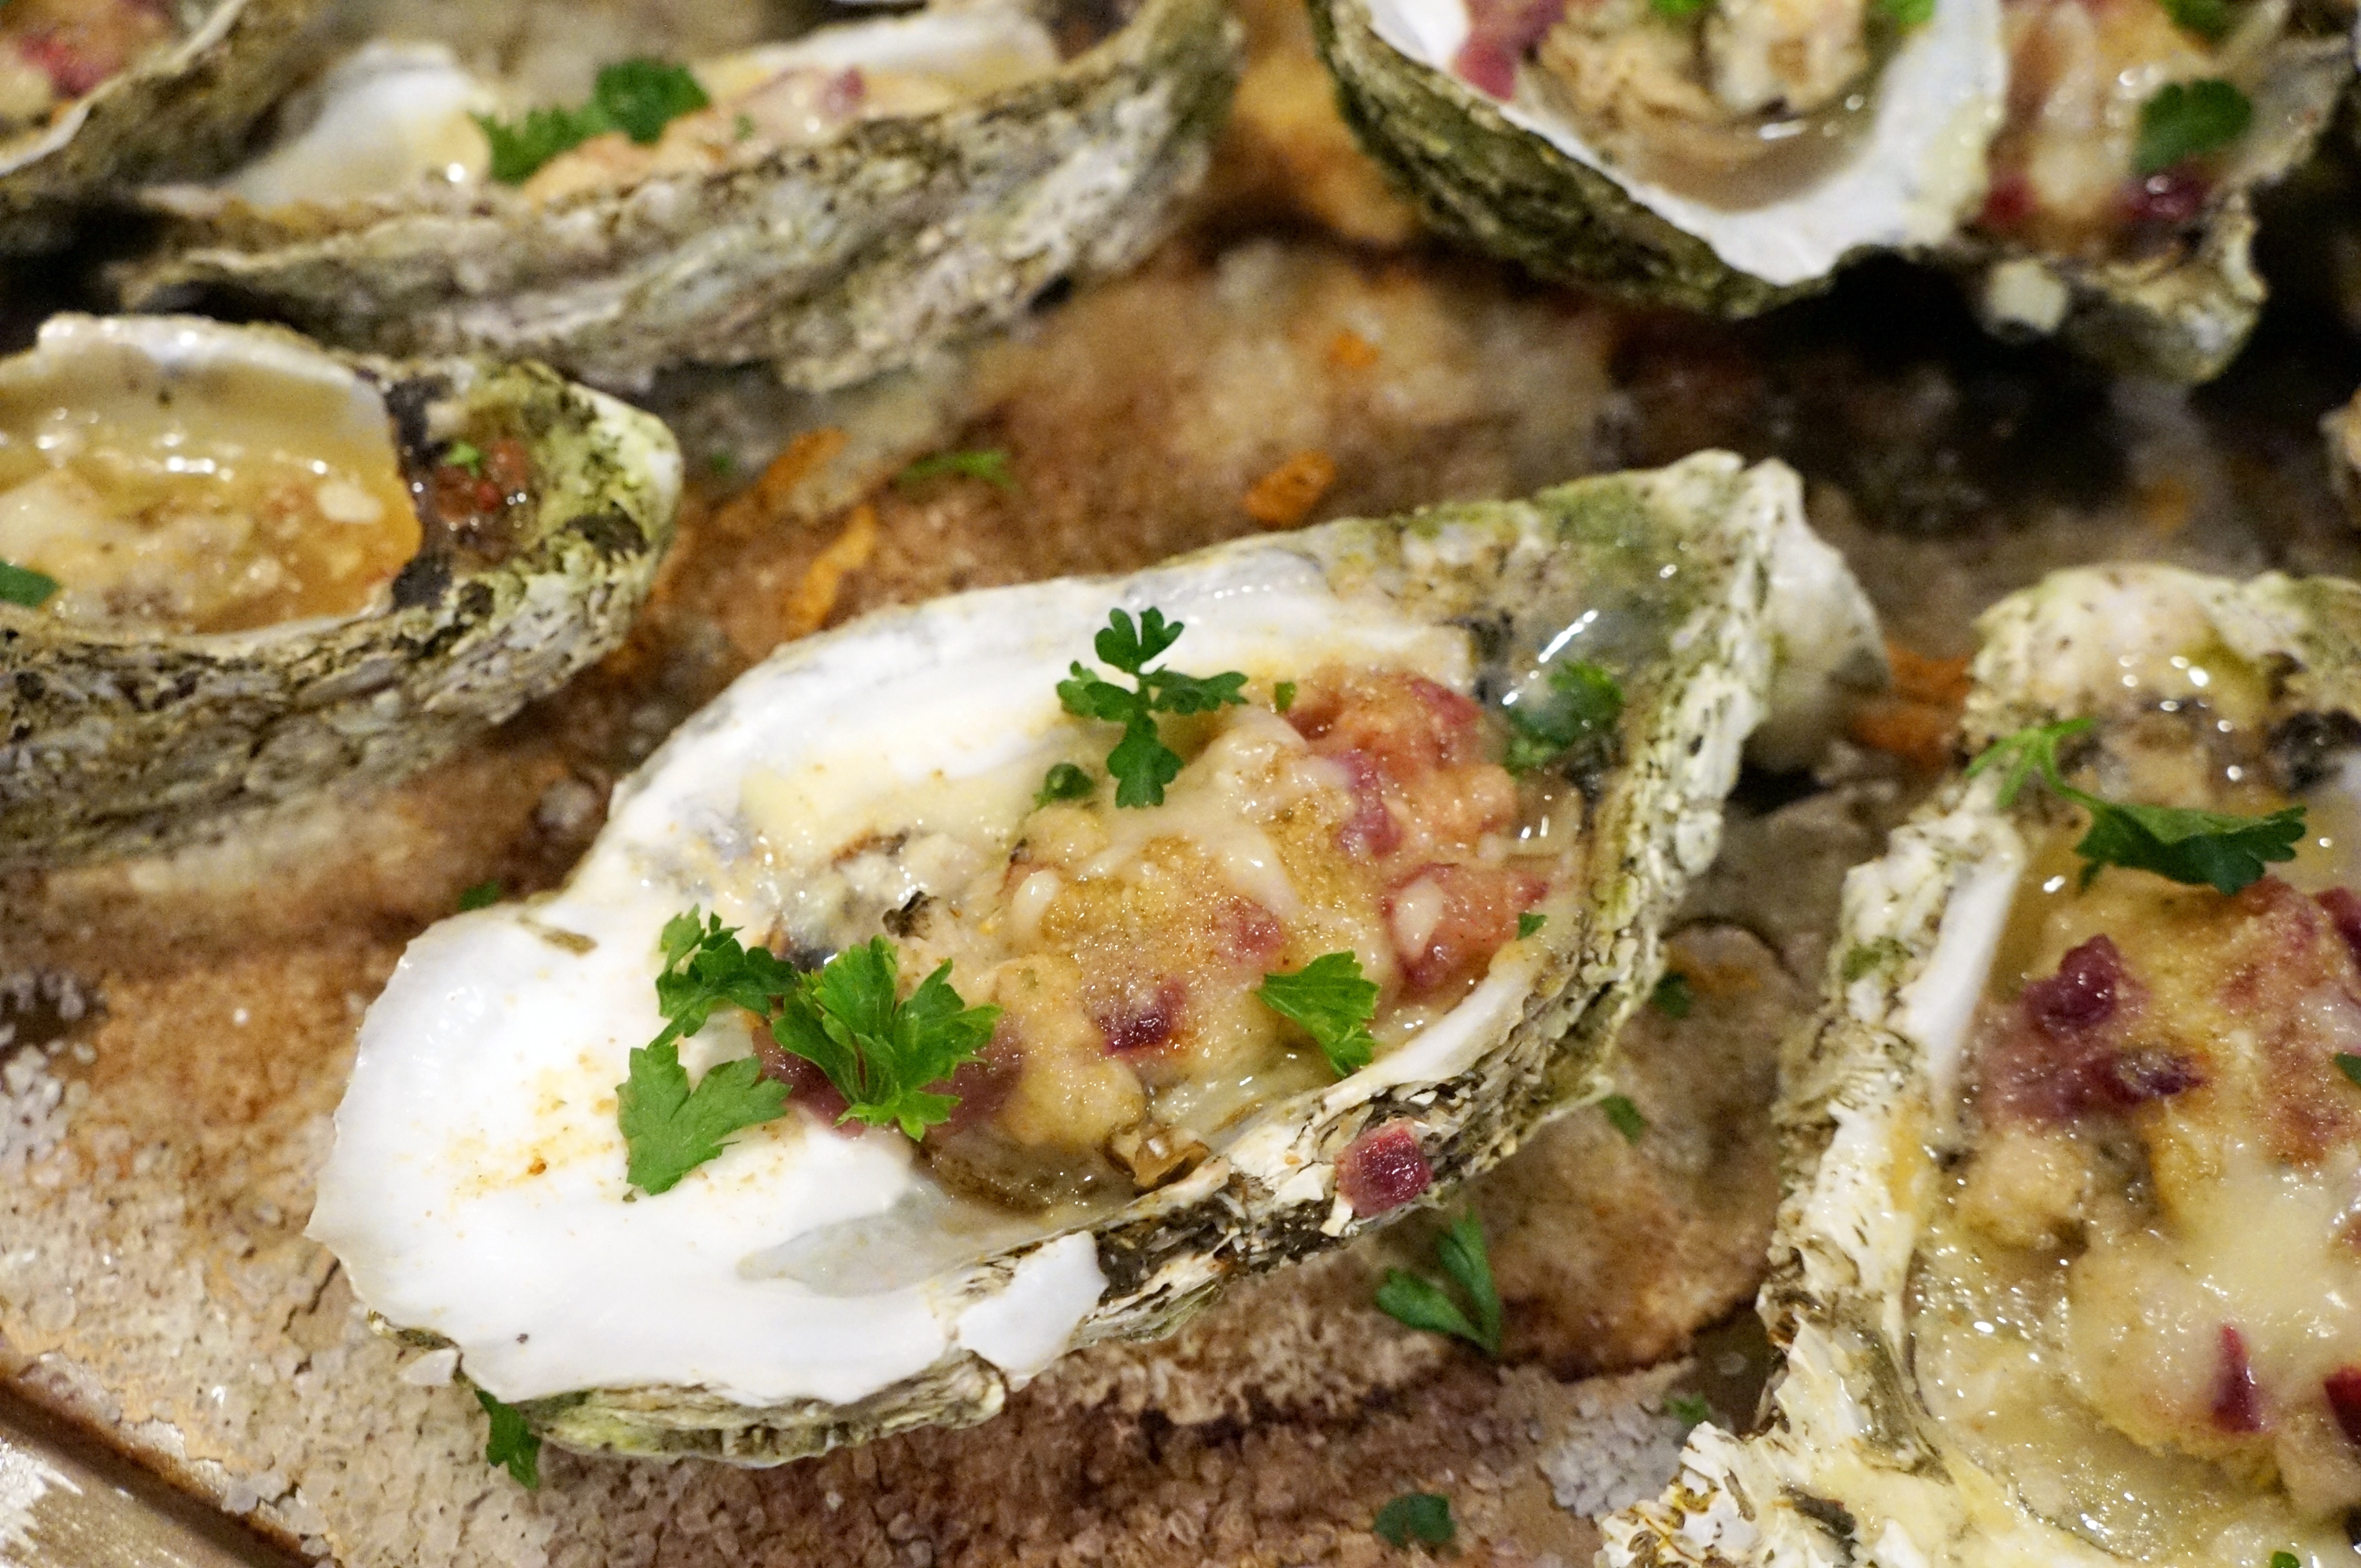 Grilled Oyster and Oyster Rockefeller Recipes